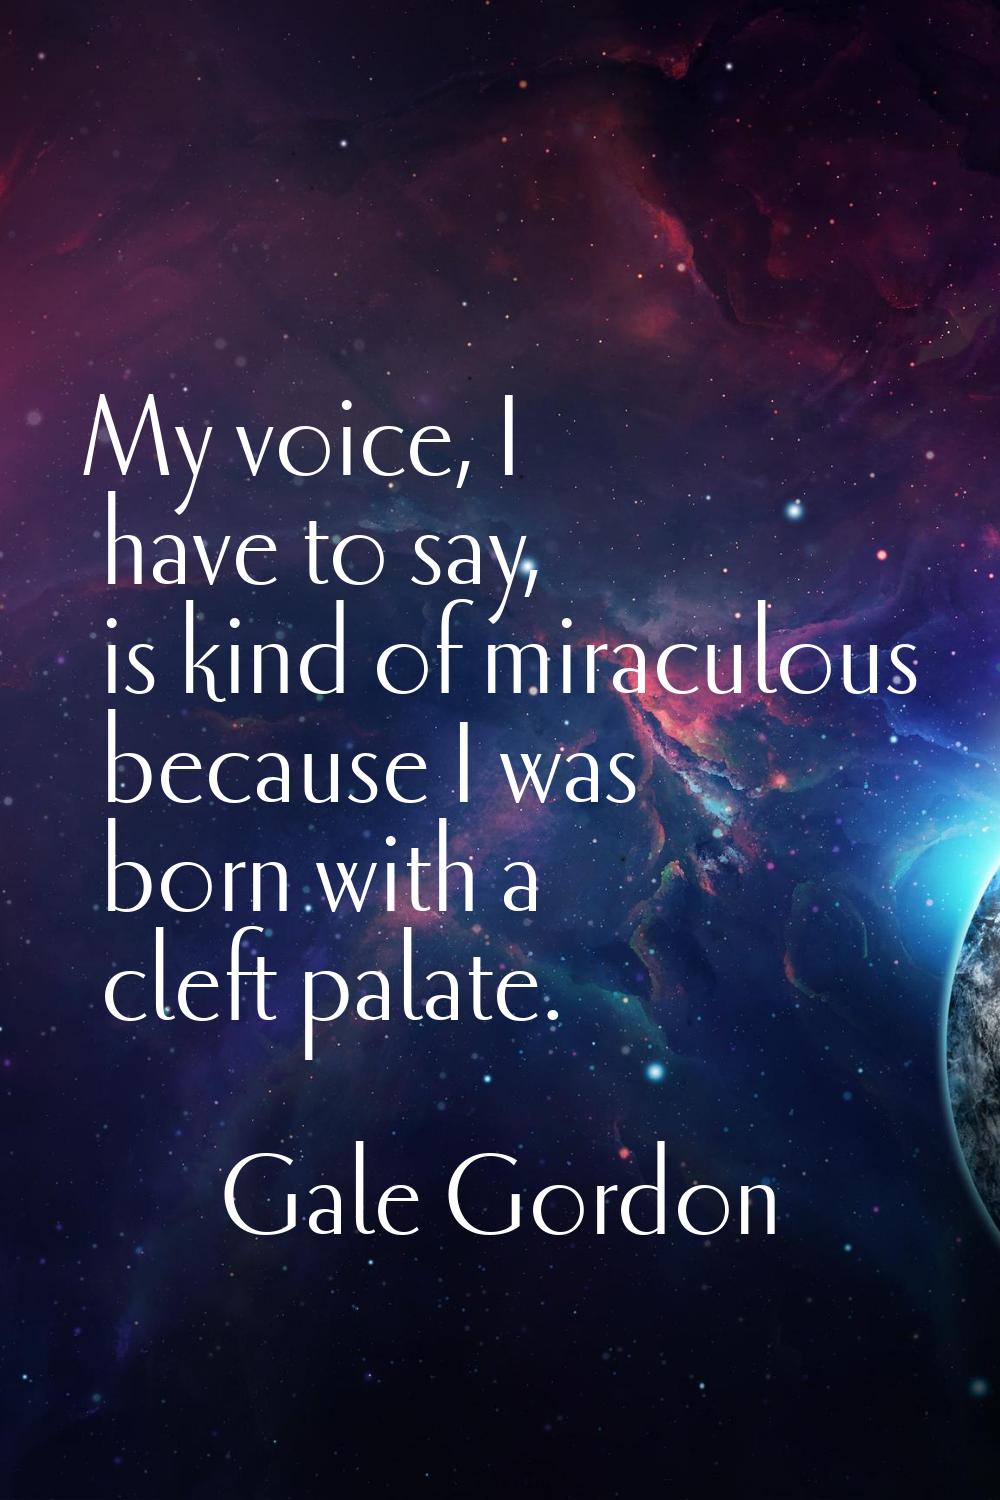 My voice, I have to say, is kind of miraculous because I was born with a cleft palate.